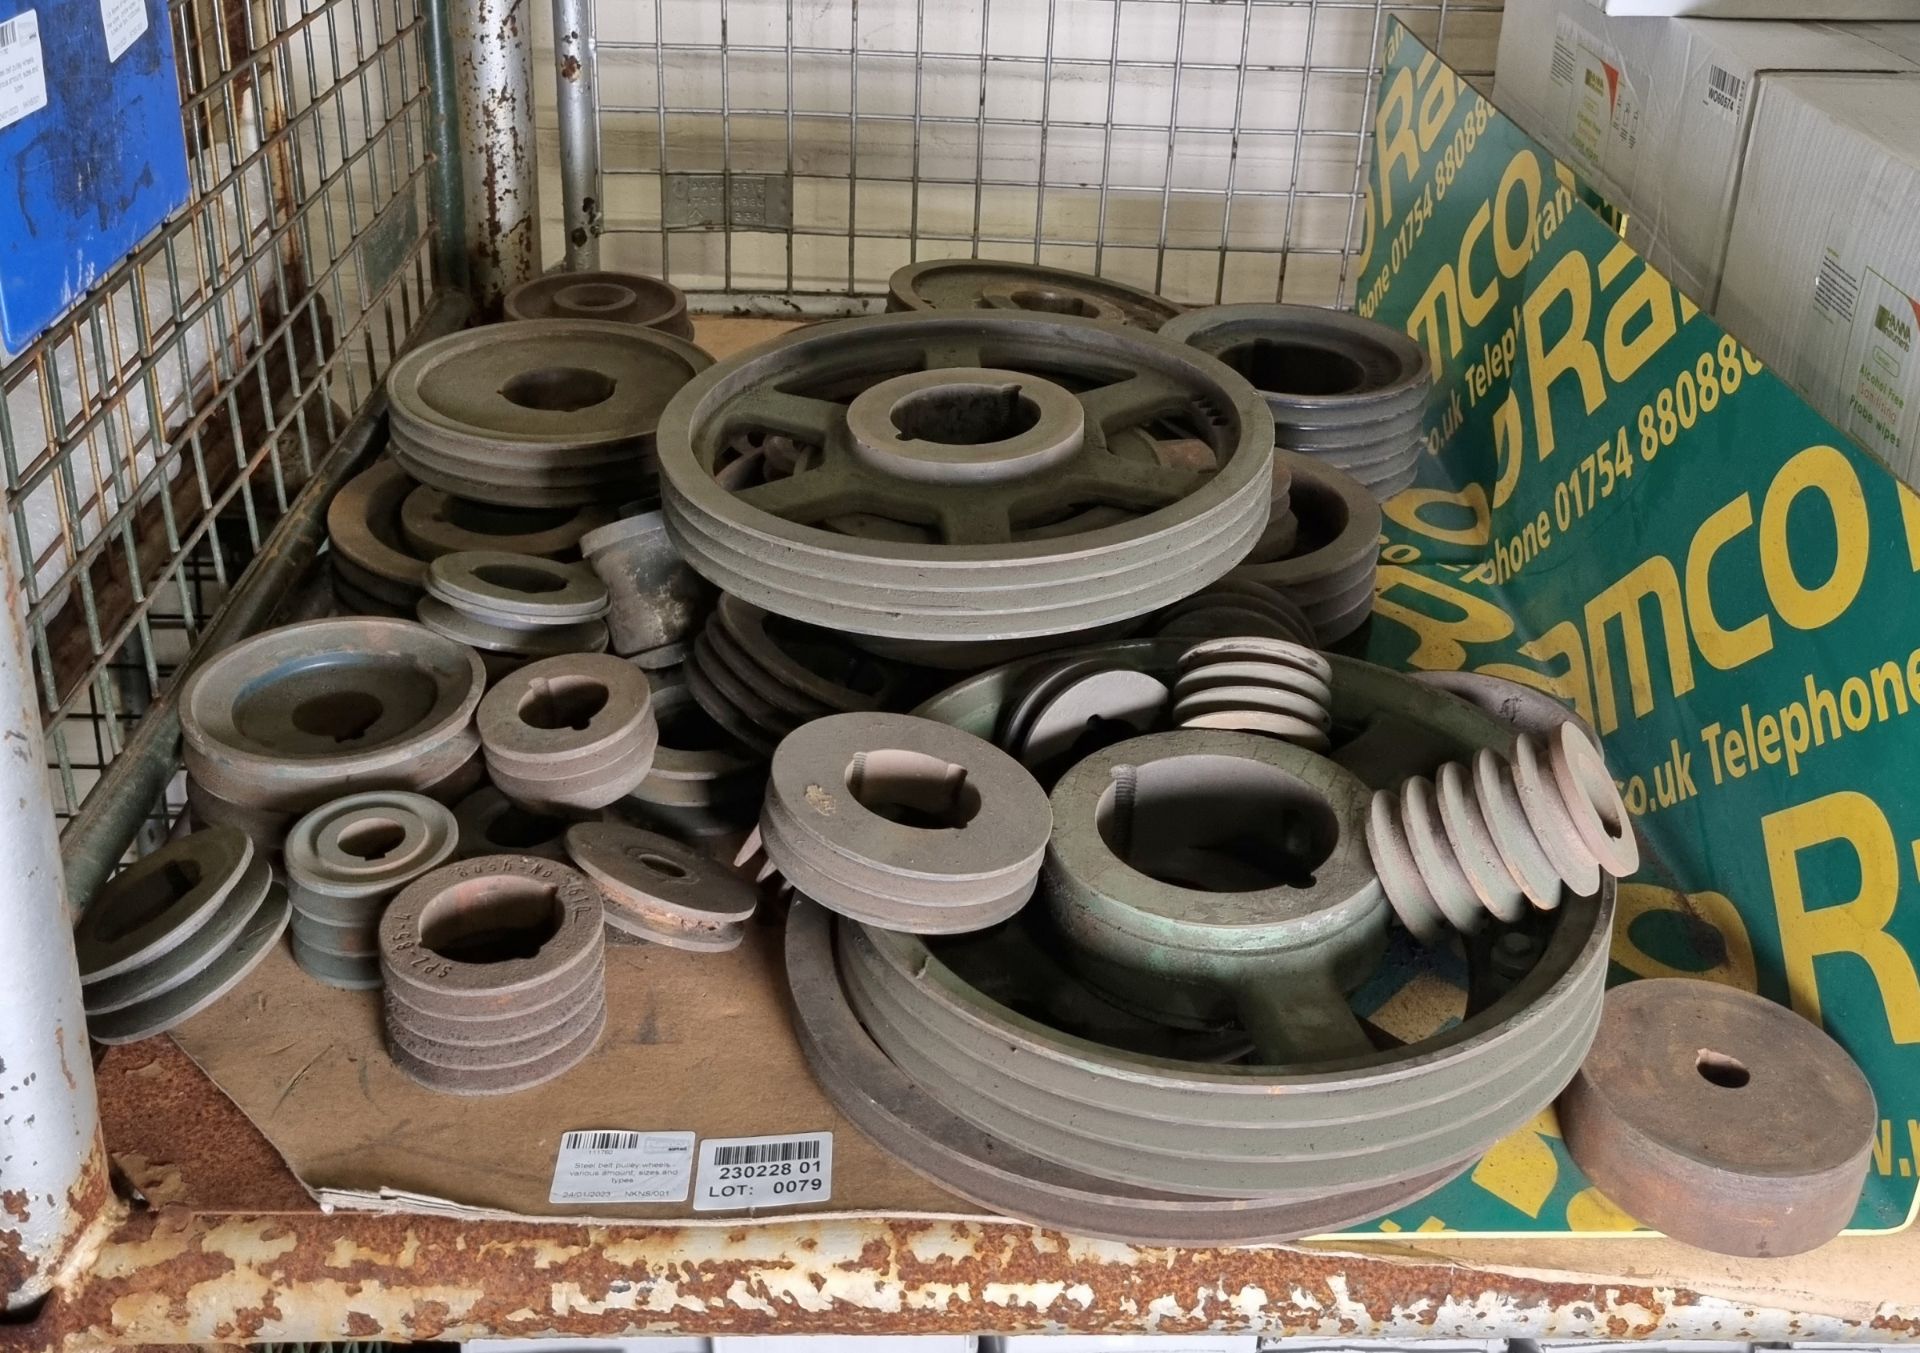 Steel belt pulley wheels - various amount, sizes and types